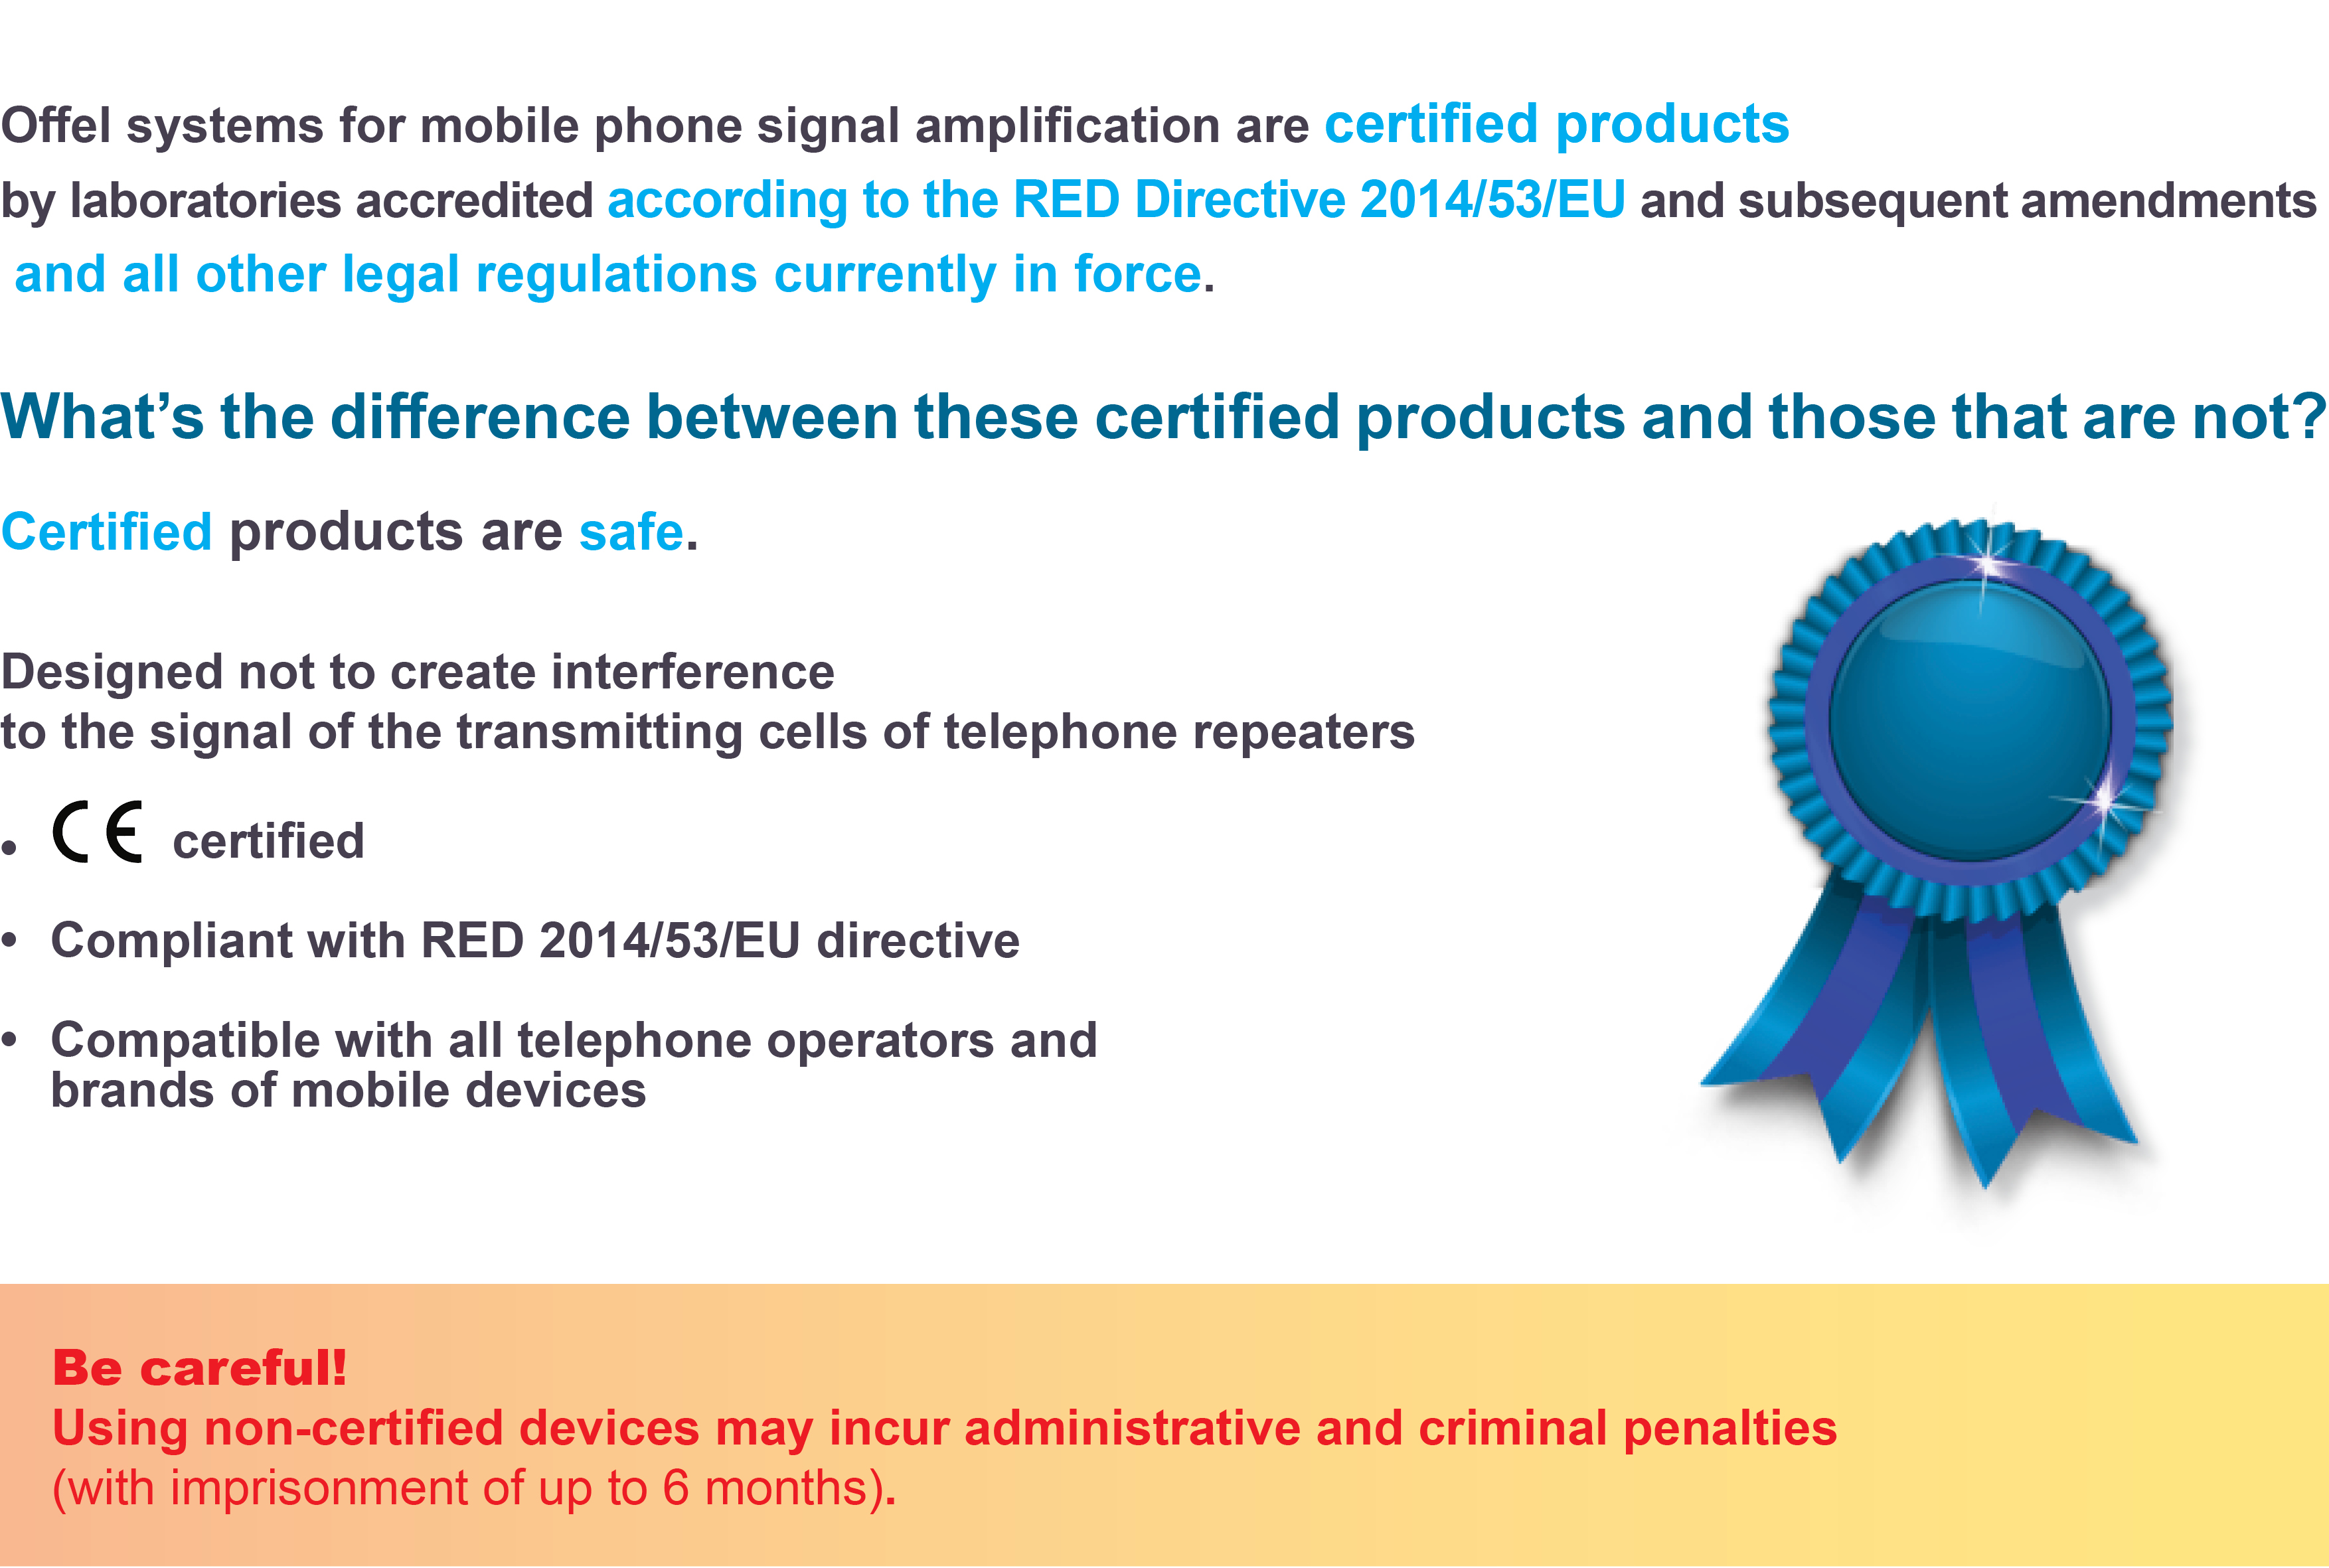 Offel systems for mobile phone signal amplification are certified products  by laboratories accredited according to the RED Directive 2014/53/EU and subsequent amendments  and all other legal regulations currently in force.  What is the difference between these certified products and those that are not?   Certified products are safe. Designed not to create interference to the signal of the transmitting cells of telephone repeaters  CE certified  Compliant with RED 2014/53/EU directive  Compatible with all telephone operators and brands of mobile devices  Be careful! Using non-certified devices may incur administrative and criminal penalties  (with imprisonment of up to 6 months).